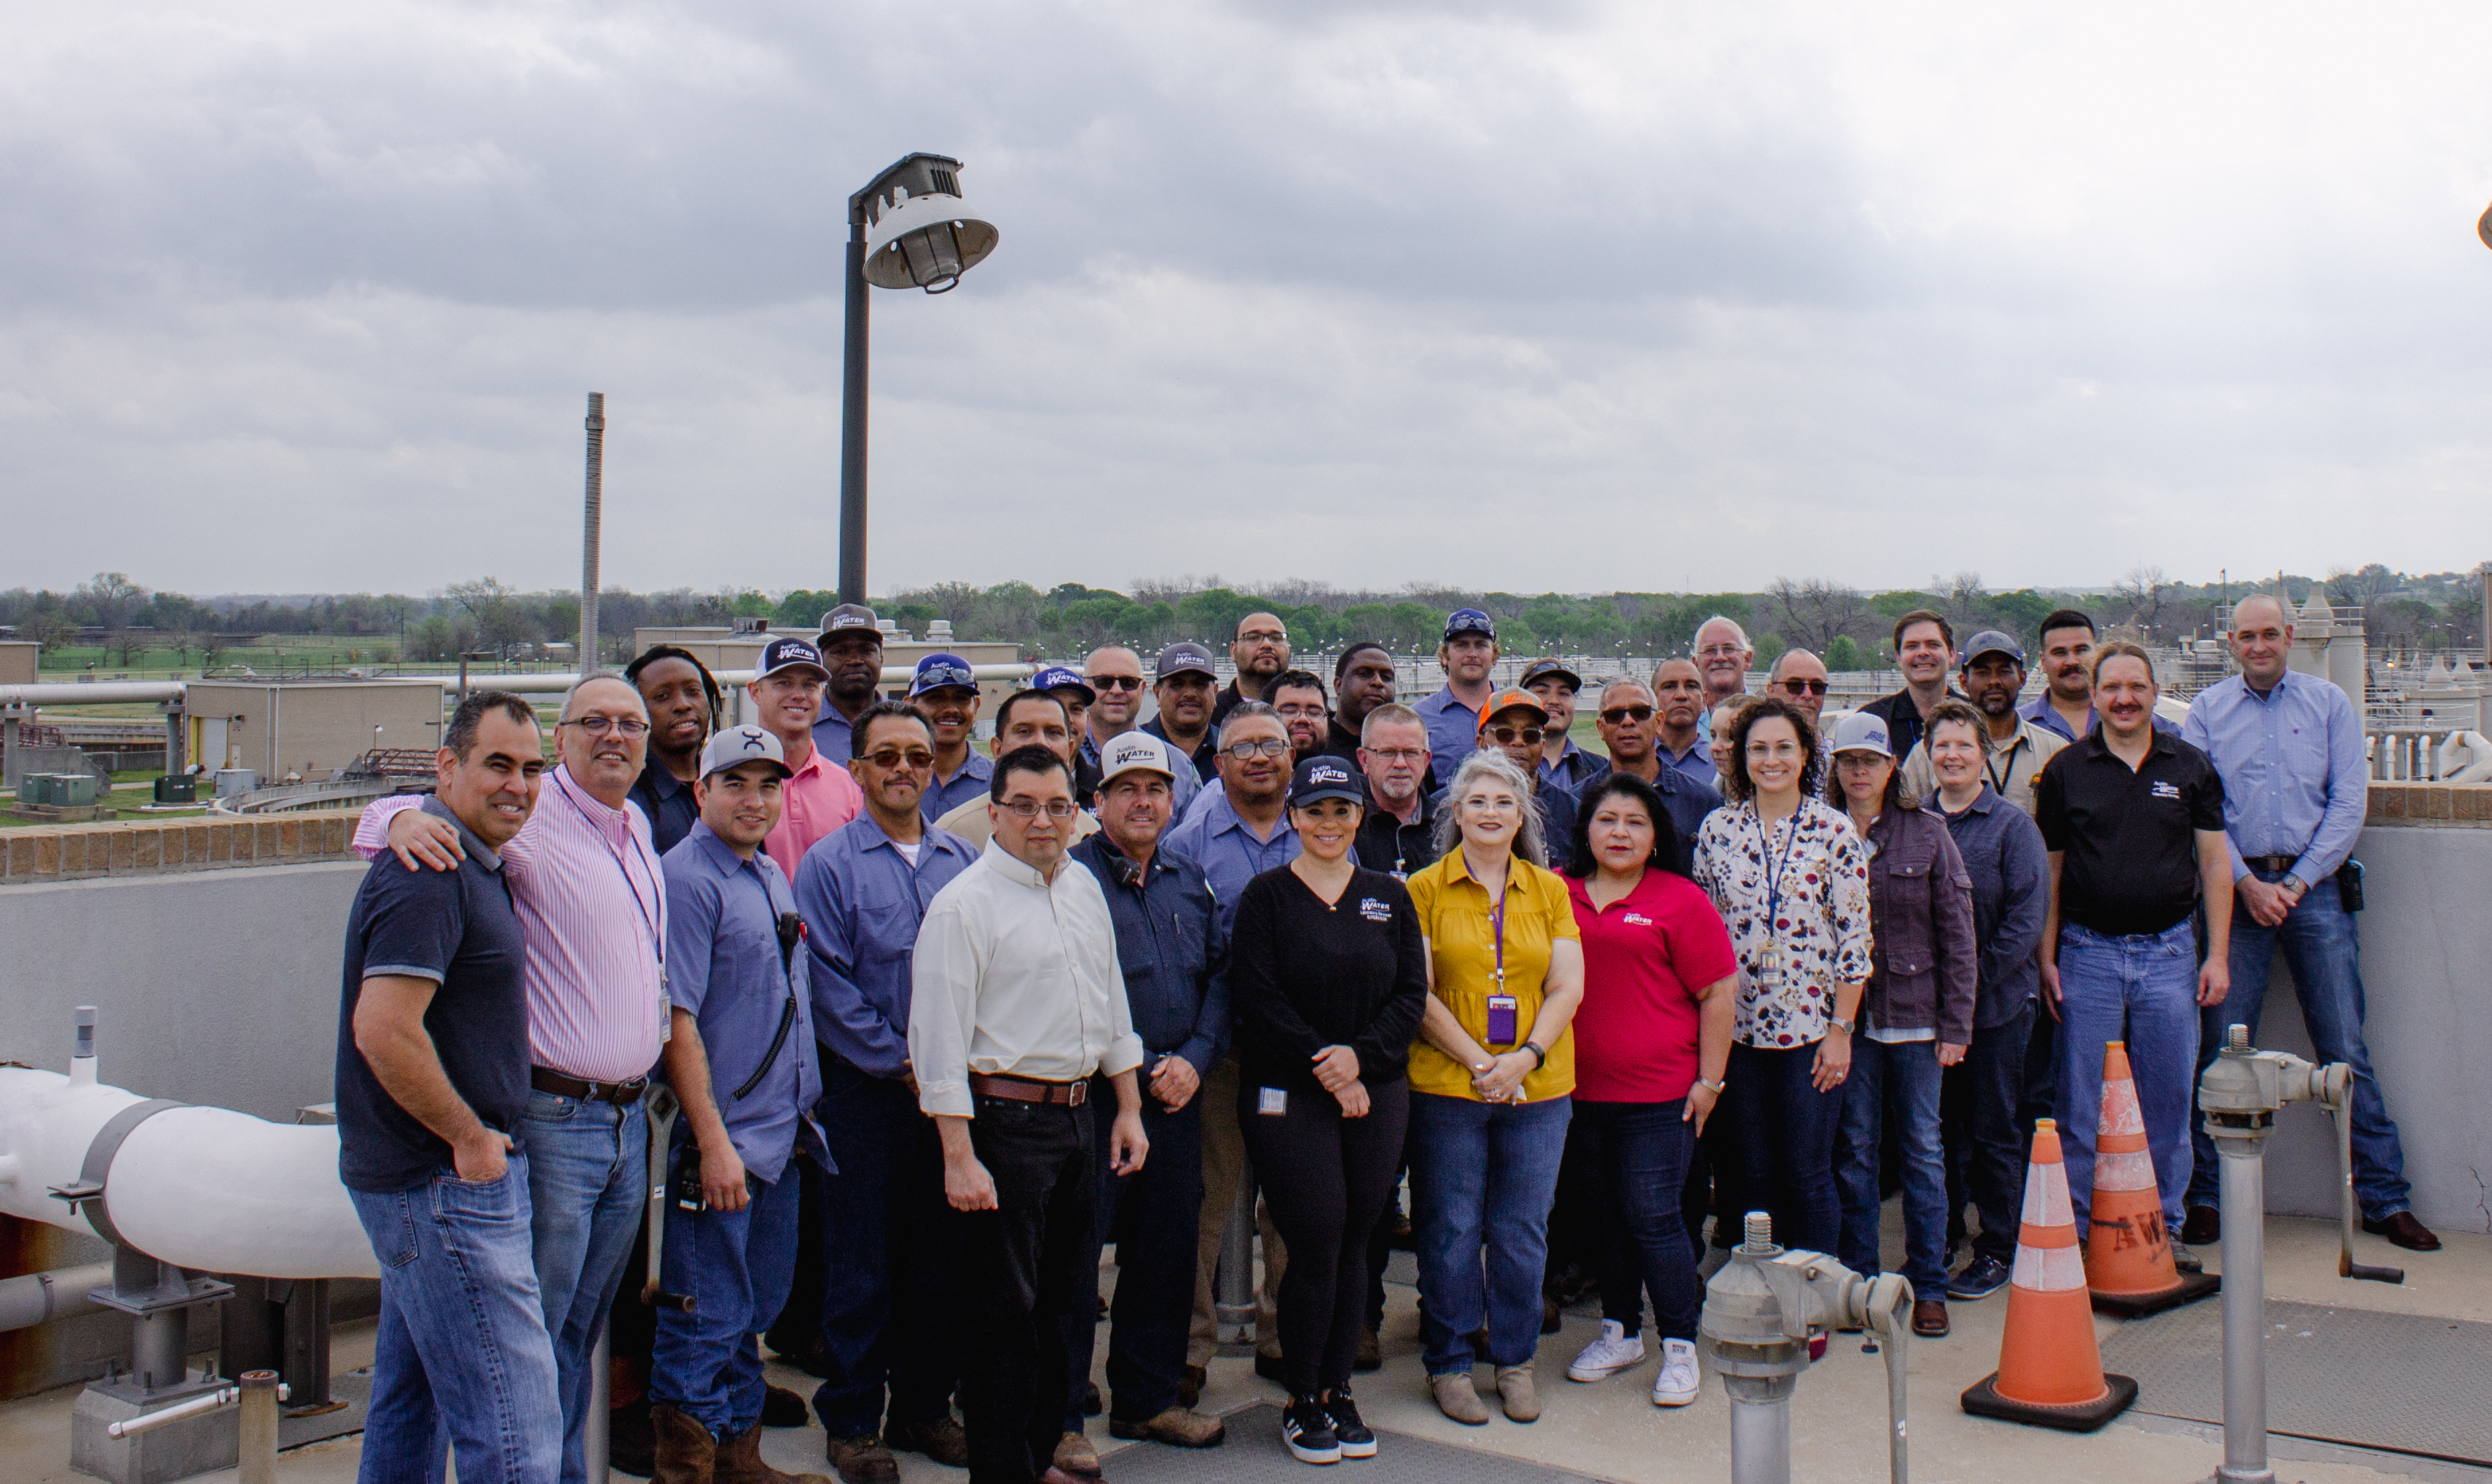 South Austin Regional Wastewater Treatment Plant crew and operations personnel